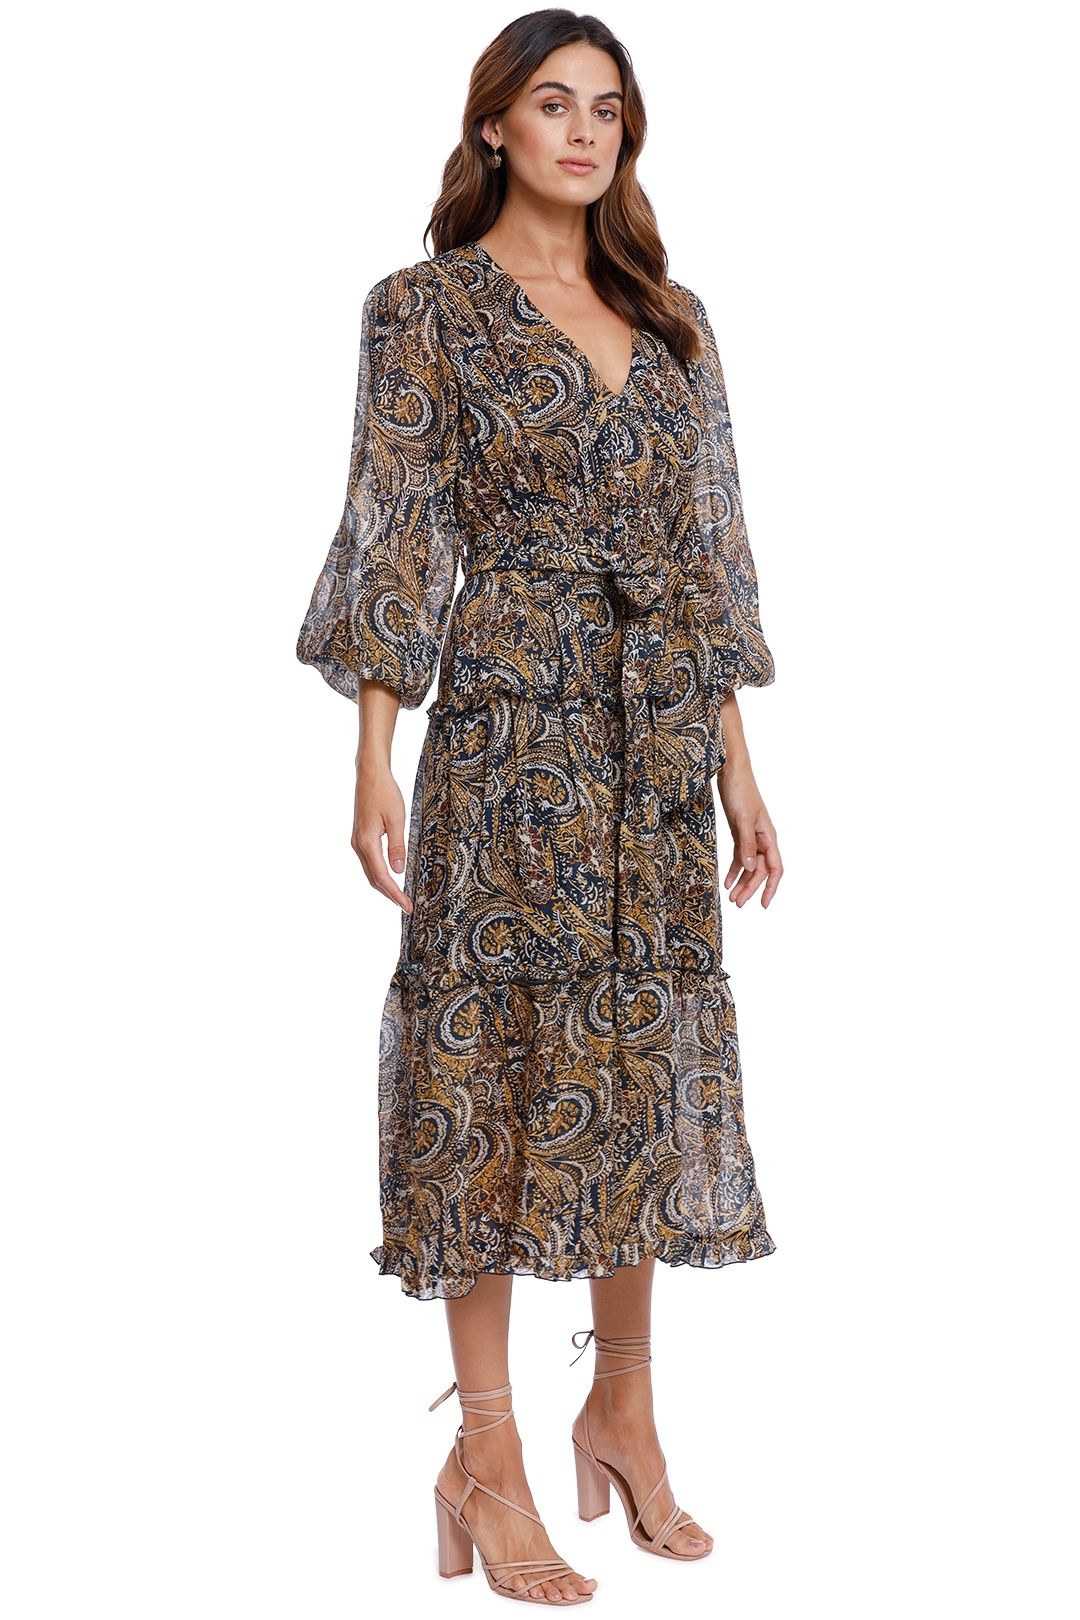 Ministry of Style Parisian Soul Midi Dress Abstract Print